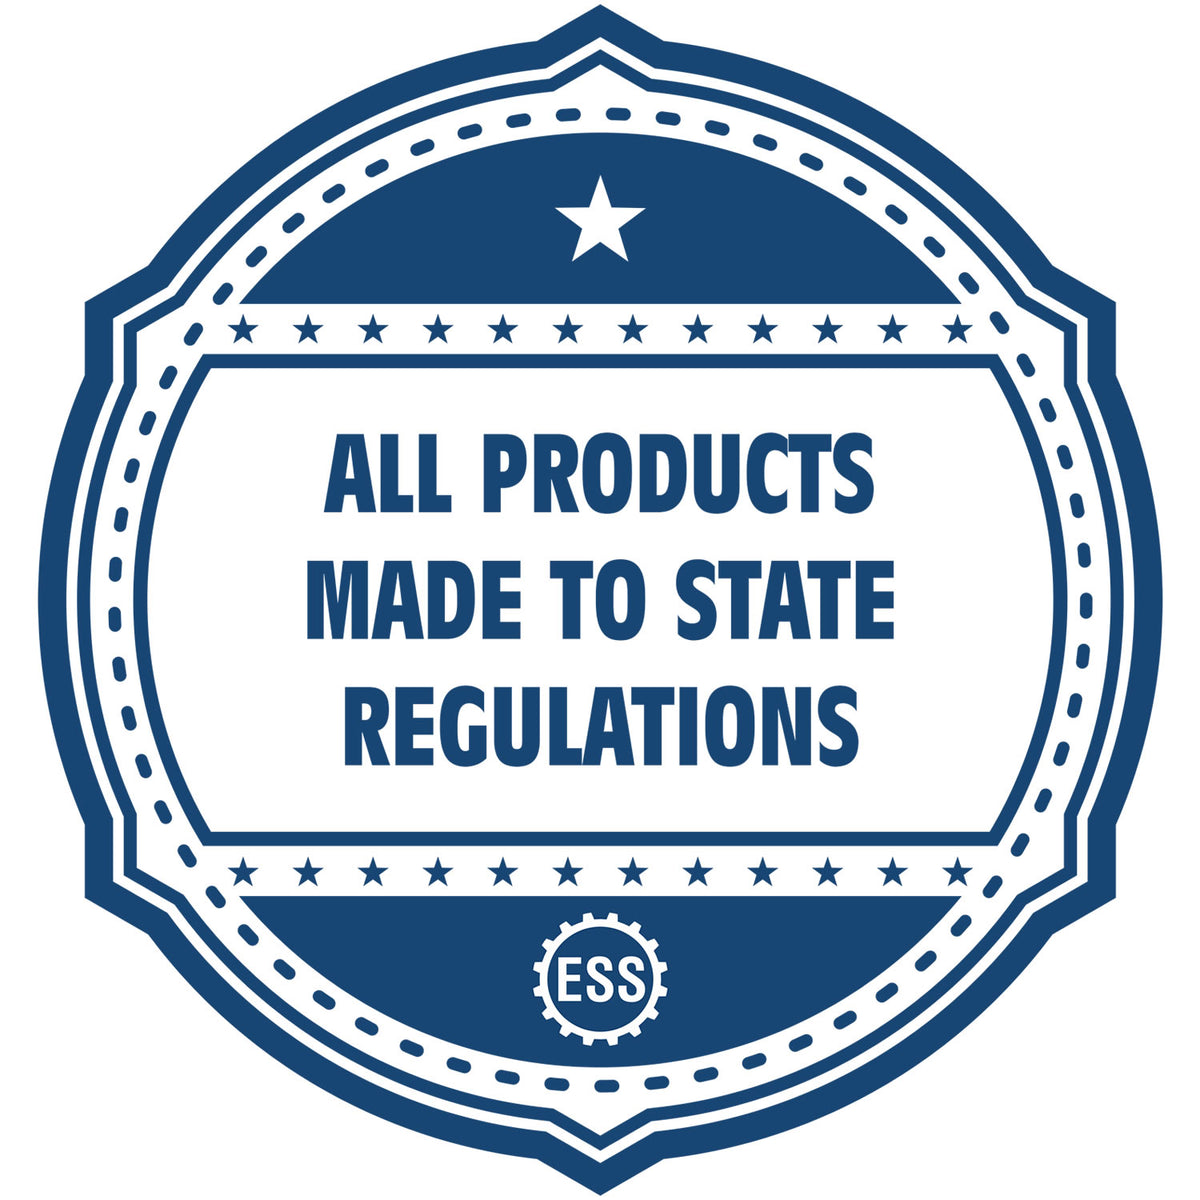 A blue icon or badge for the Hybrid Texas Geologist Seal showing that this product is made in compliance with state regulations.